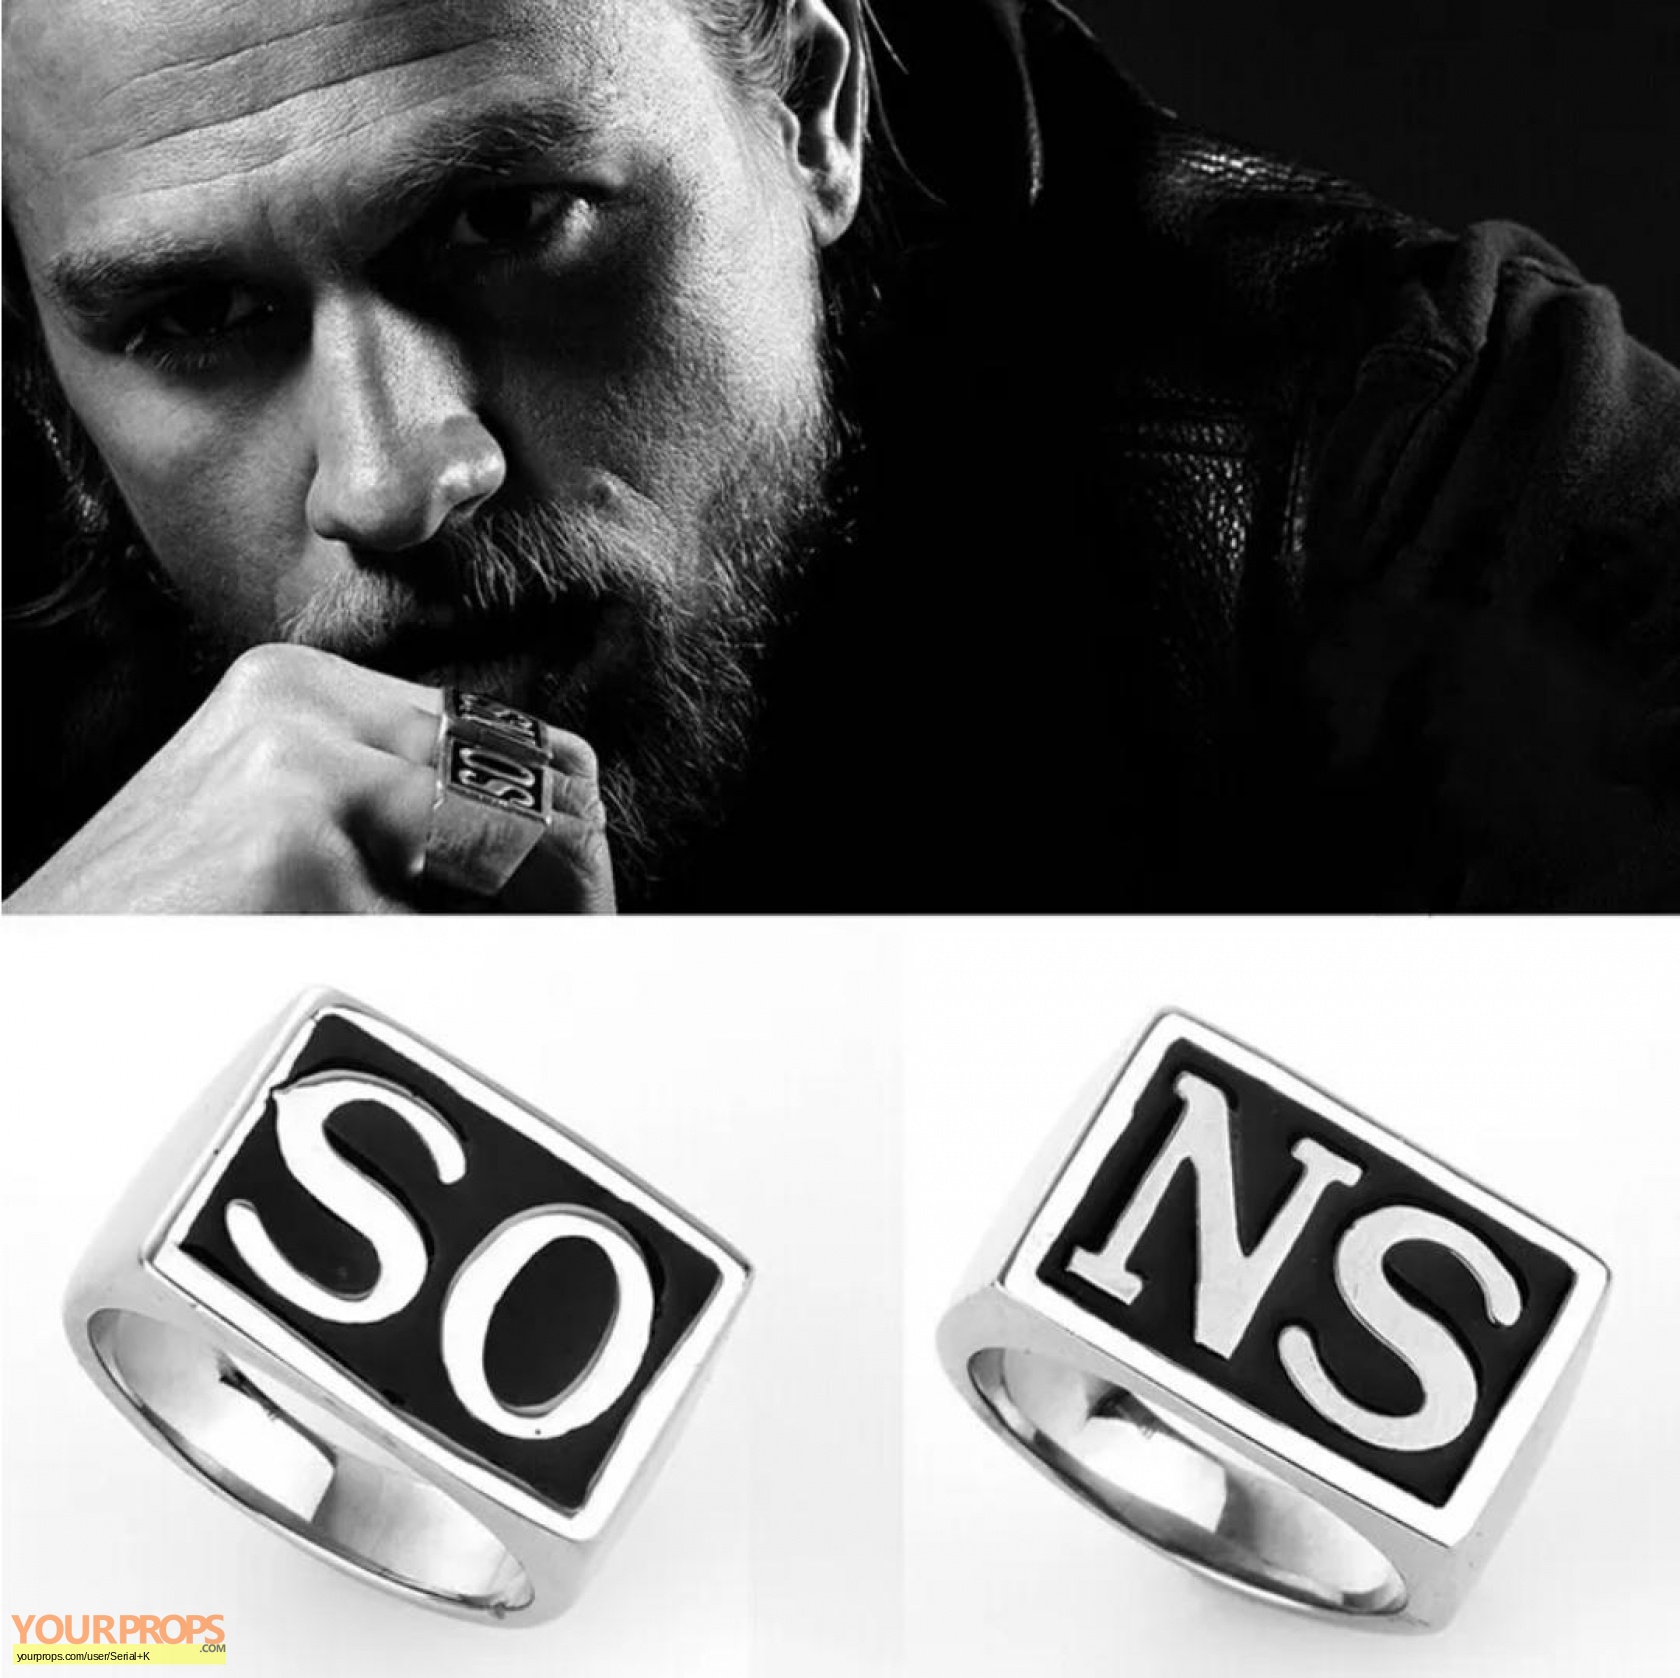 Sons of Anarchy S.O.A Jax Teller's Rings SO NS replica TV series costume